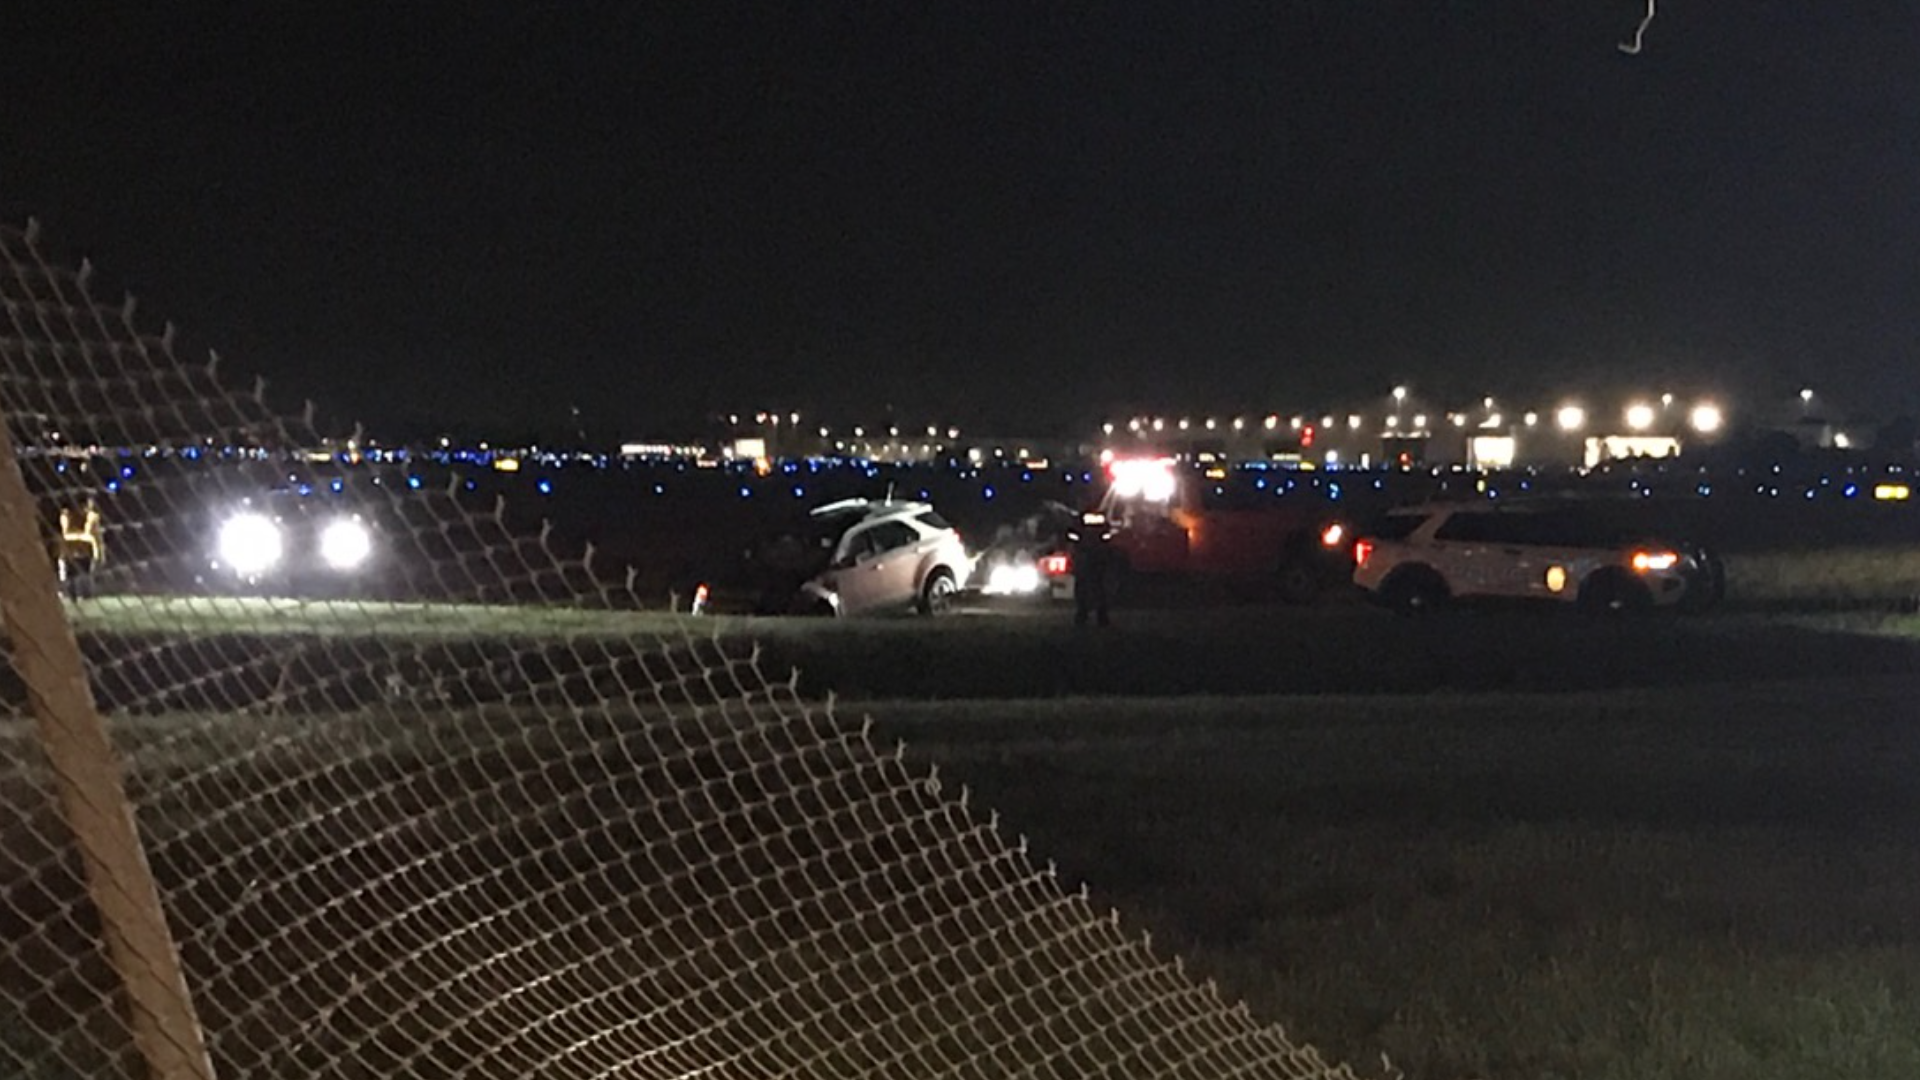 The chase happened before 2:30 a.m. and ended on Stelzer Road near the John Glenn Columbus International Airport.